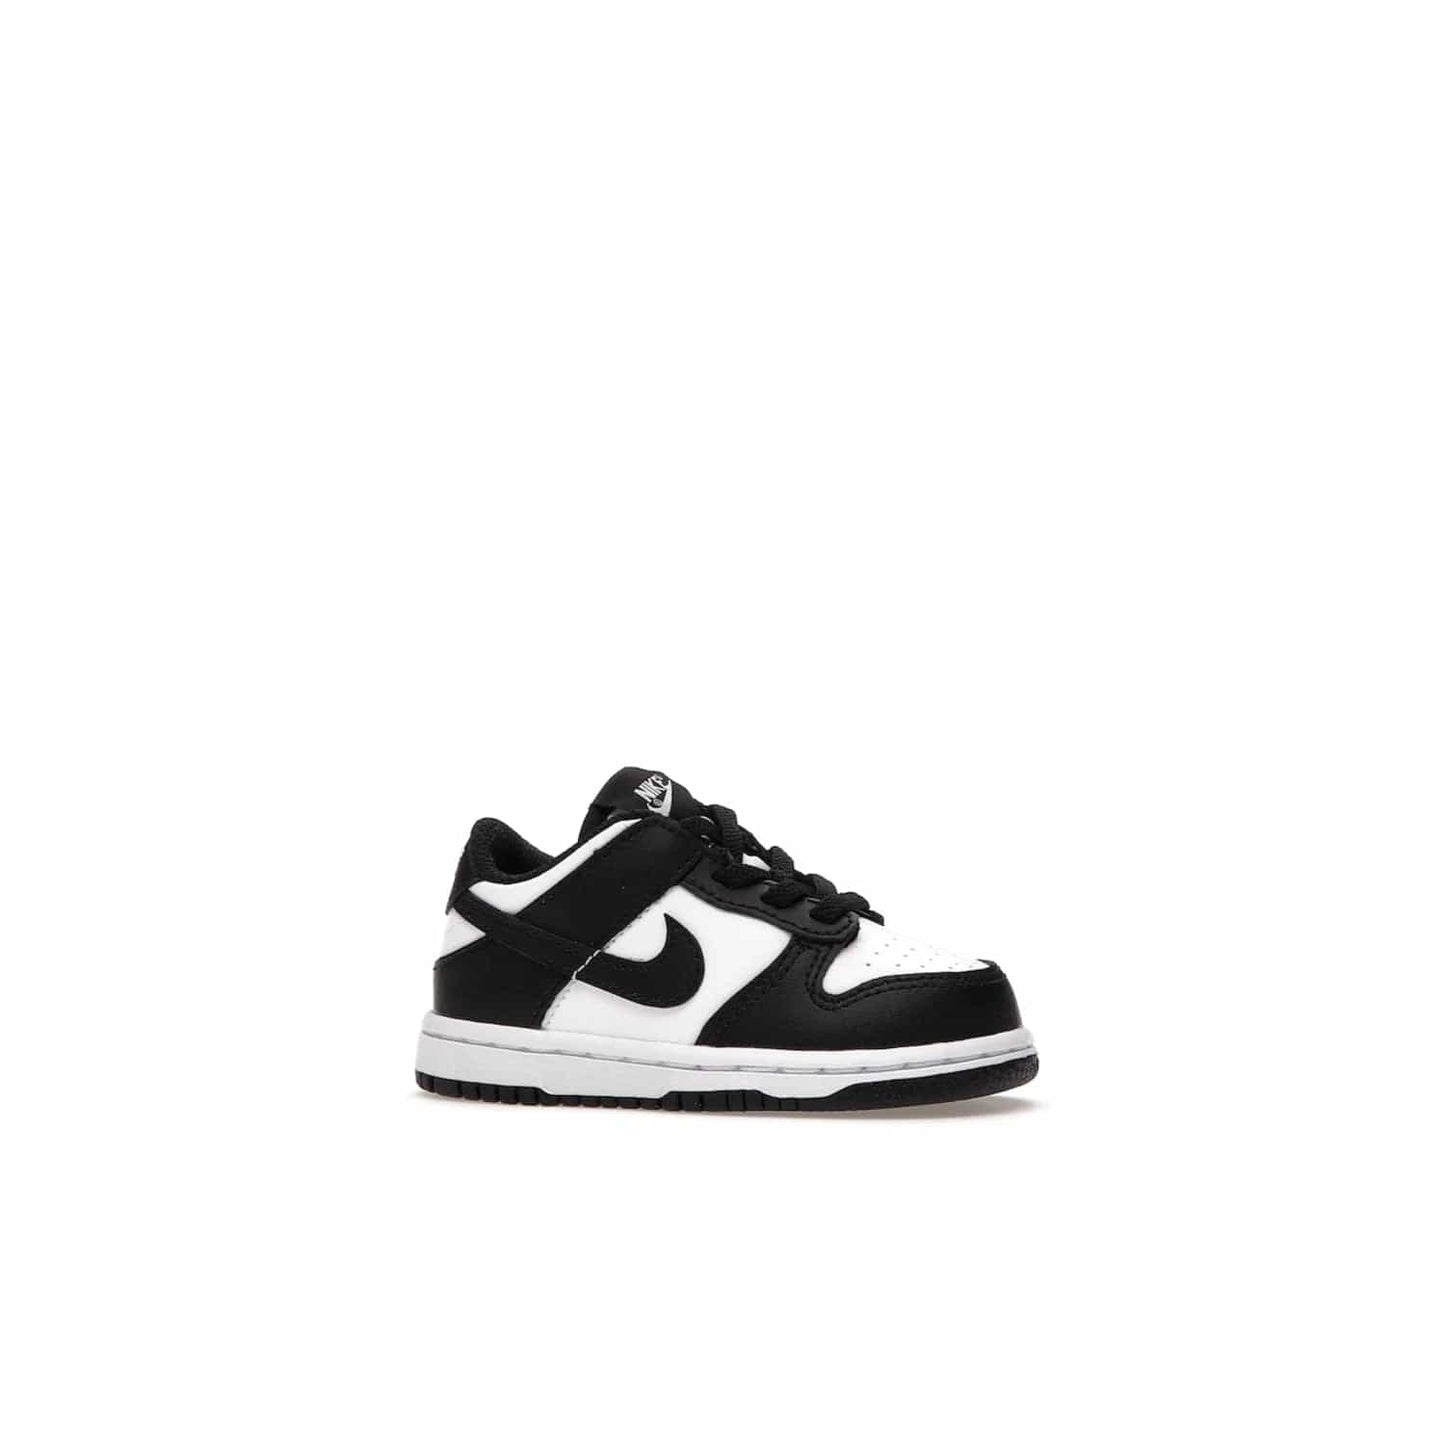 Nike Dunk Low Retro White Black Panda (2021) (TD) - Image 3 - Only at www.BallersClubKickz.com - The perfect blend of classic style and modern style, the Nike Dunk Low Retro White Black (TD) toddler shoe has a soft leather upper, white midsole, and black outsole. Signature Swoosh branding and lightly padded tongue give it timeless Nike style. Released in March 2021.